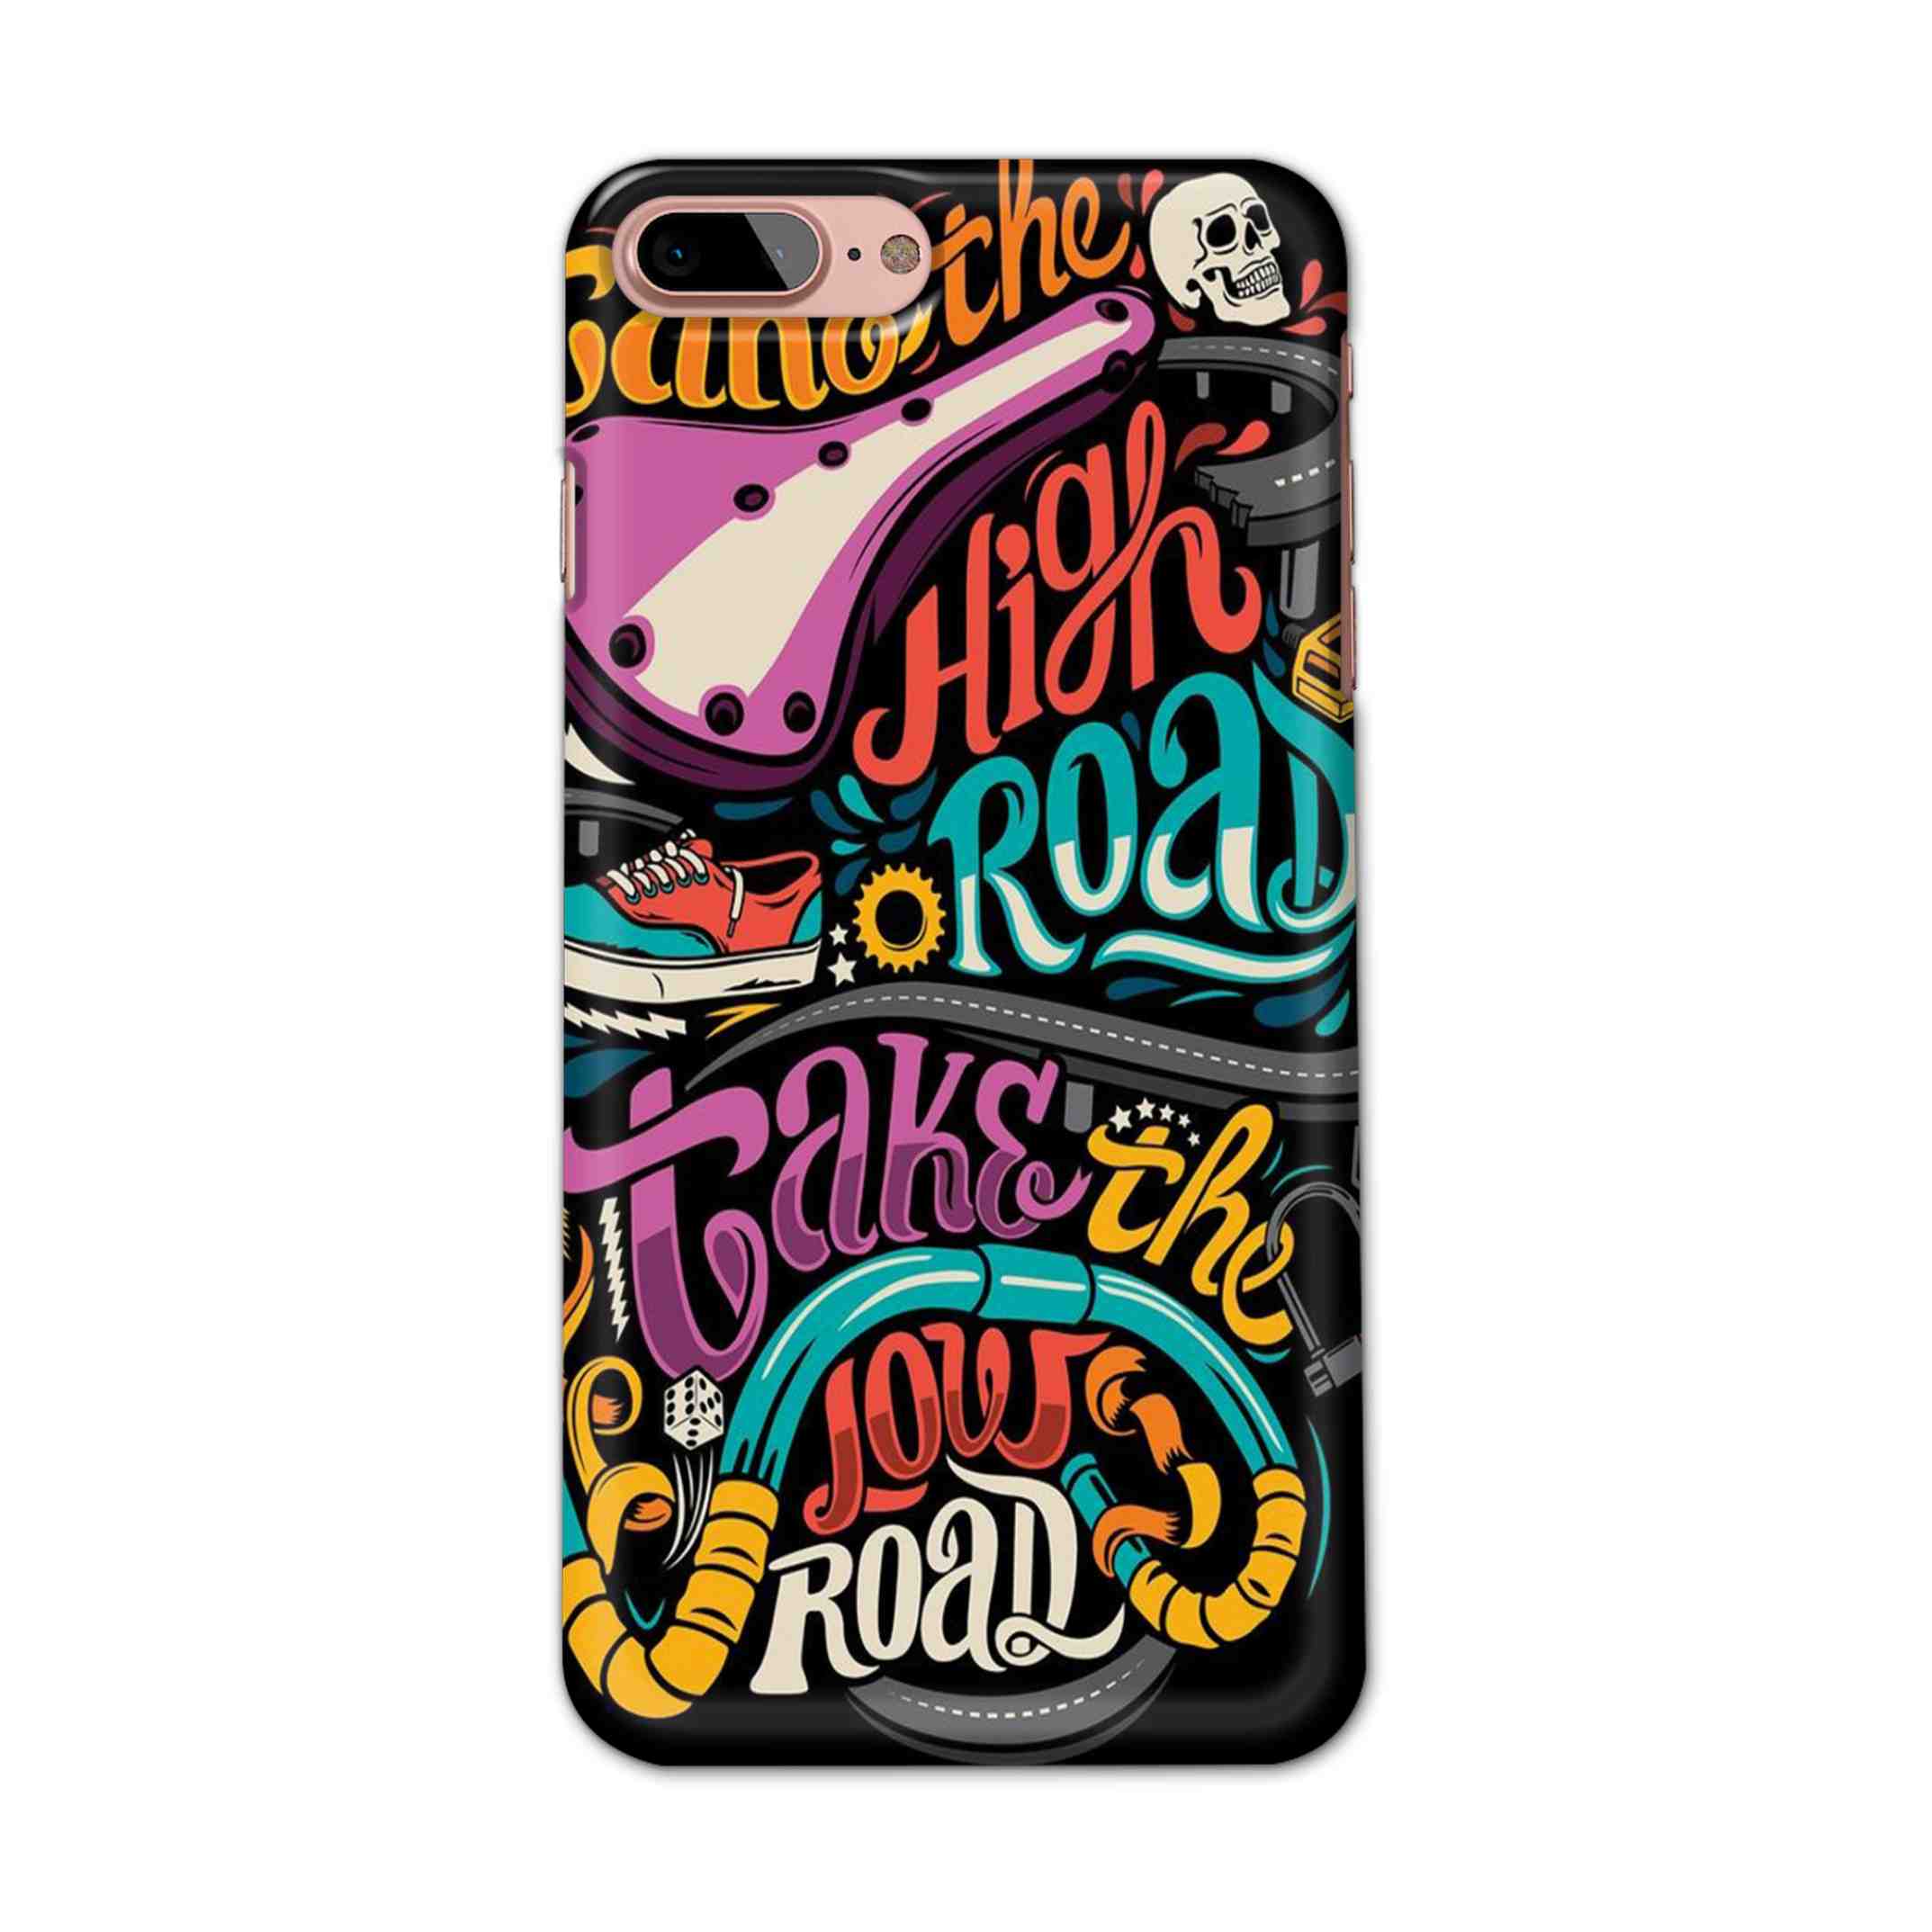 Buy Take The High Road Hard Back Mobile Phone Case/Cover For iPhone 7 Plus / 8 Plus Online